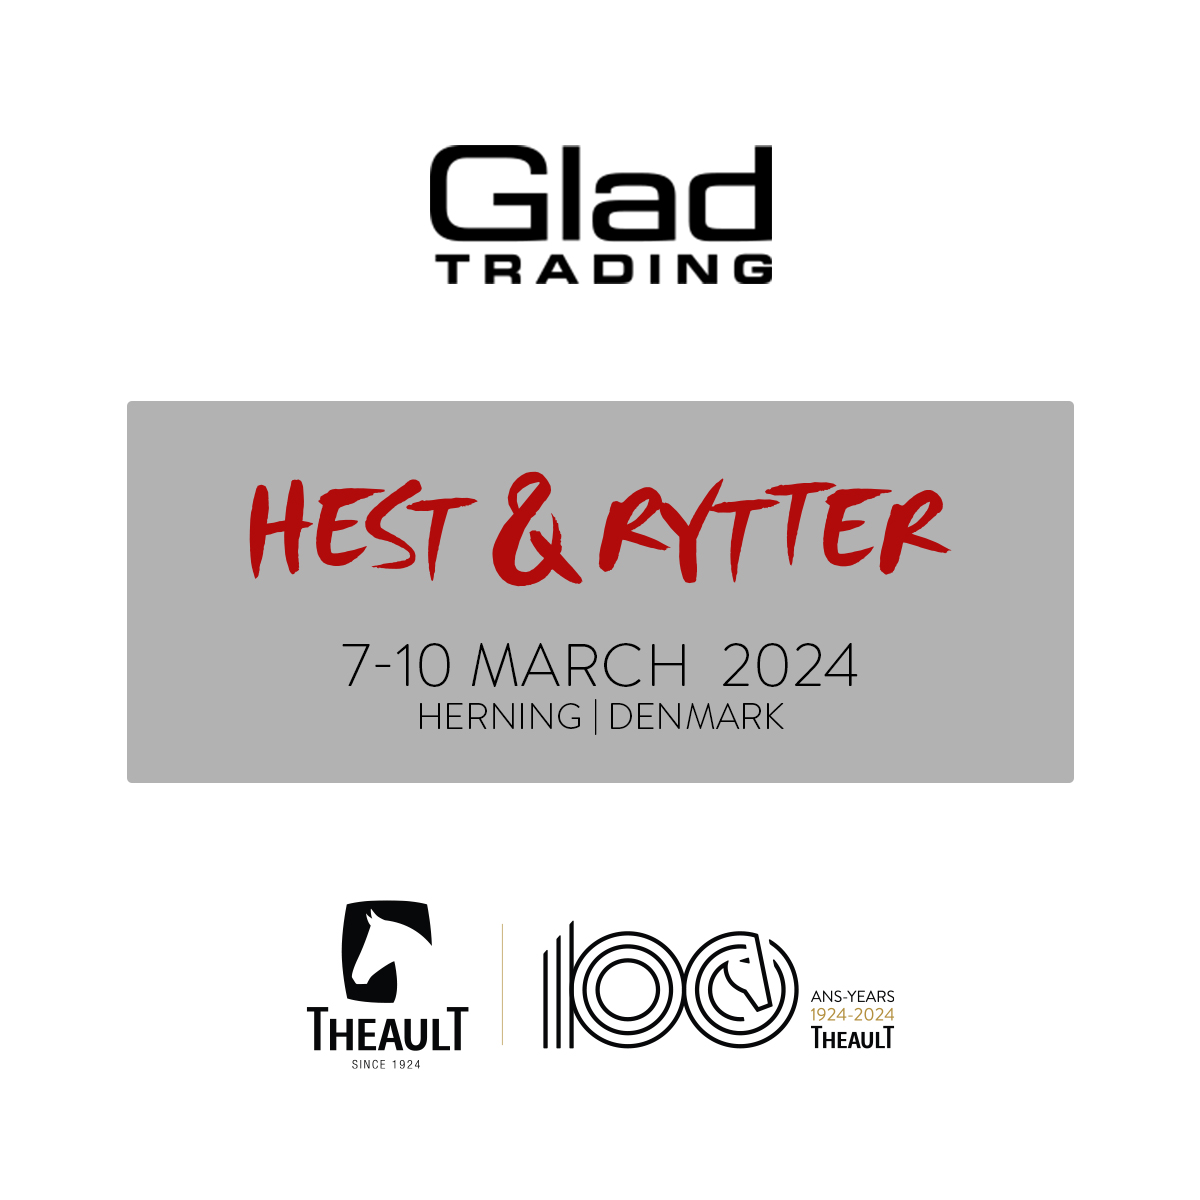 From 7 to 10 March, our distributor Glad Trading will be at the Hest & Rytter event in Herning! Meet the THEAULT Danmark team and discover our vehicles on booth M9870! Vi ses snart! 🇩🇰 #theault #gladtrading #denmark #hestogrytter #proteoswitch #madeinfrance #madewithpassion